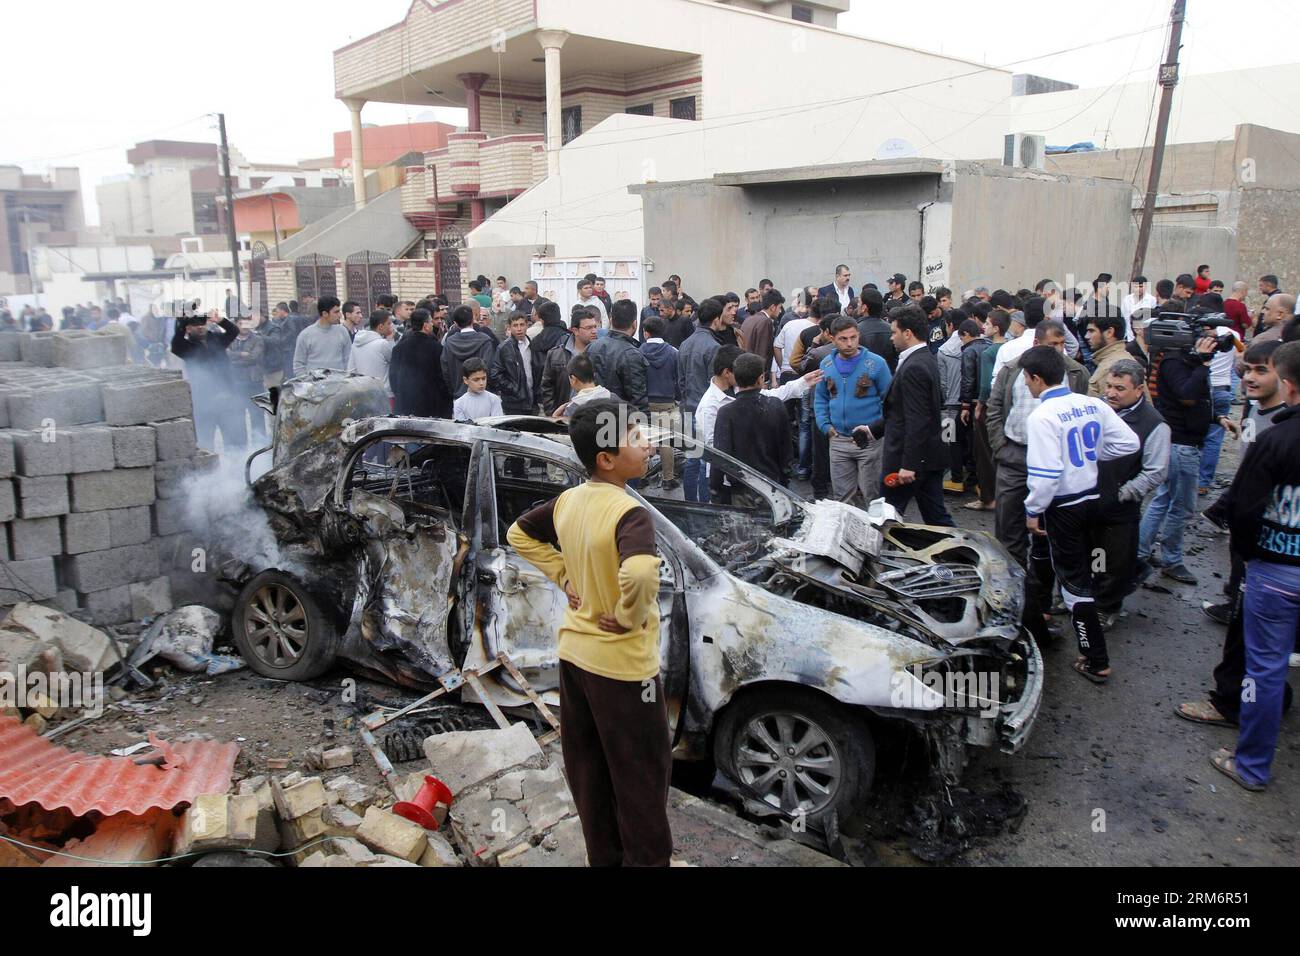 (140126) -- KIRKUK, Jan. 26, 2014 (Xinhua) -- People gather around a damaged vehicle at the blast site in Kirkuk, Iraq, on Jan. 26, 2014. At least four people were killed and 14 wounded in the afternoon when three car bombs detonated almost simultaneously in separate neighborhoods in the city of Kirkuk, some 250 km north of the Iraqi capital of Baghdad, a local police source told Xinhua on condition of anonymity. (Xinhua/Dena Assad) (zjl) IRAQ-KIRKUK-BLAST PUBLICATIONxNOTxINxCHN   Kirkuk Jan 26 2014 XINHUA Celebrities gather Around a damaged Vehicle AT The Blast Site in Kirkuk Iraq ON Jan 26 2 Stock Photo